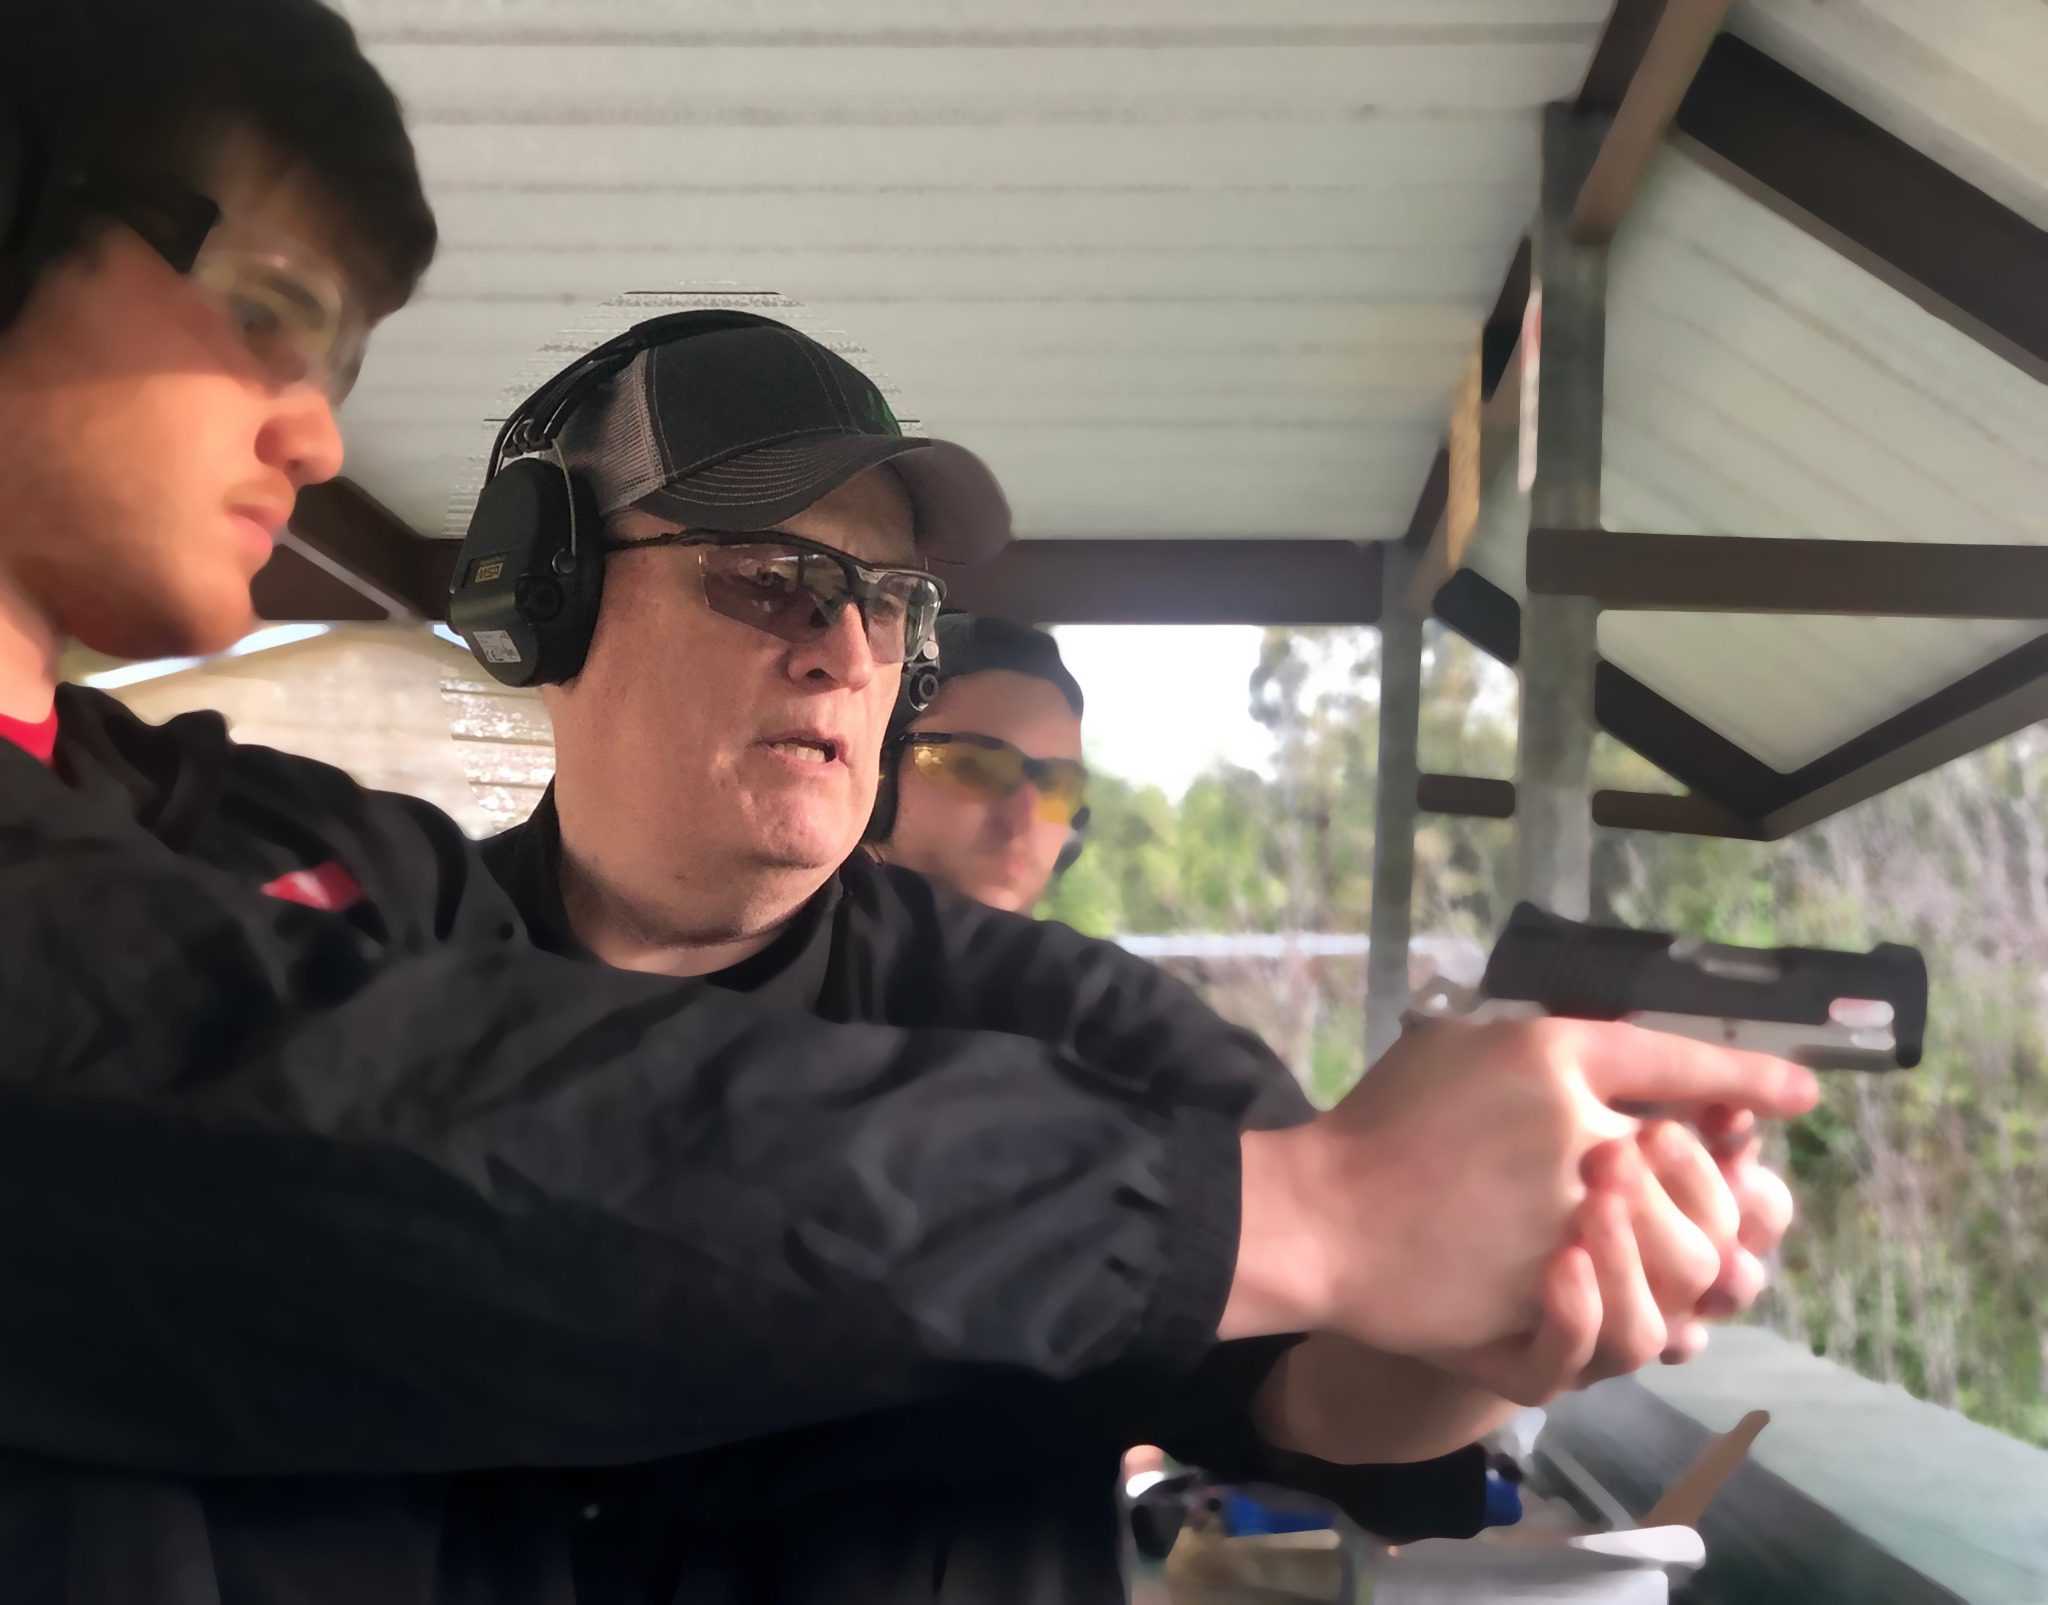 Richard Worthey doing training on how to use a pistol